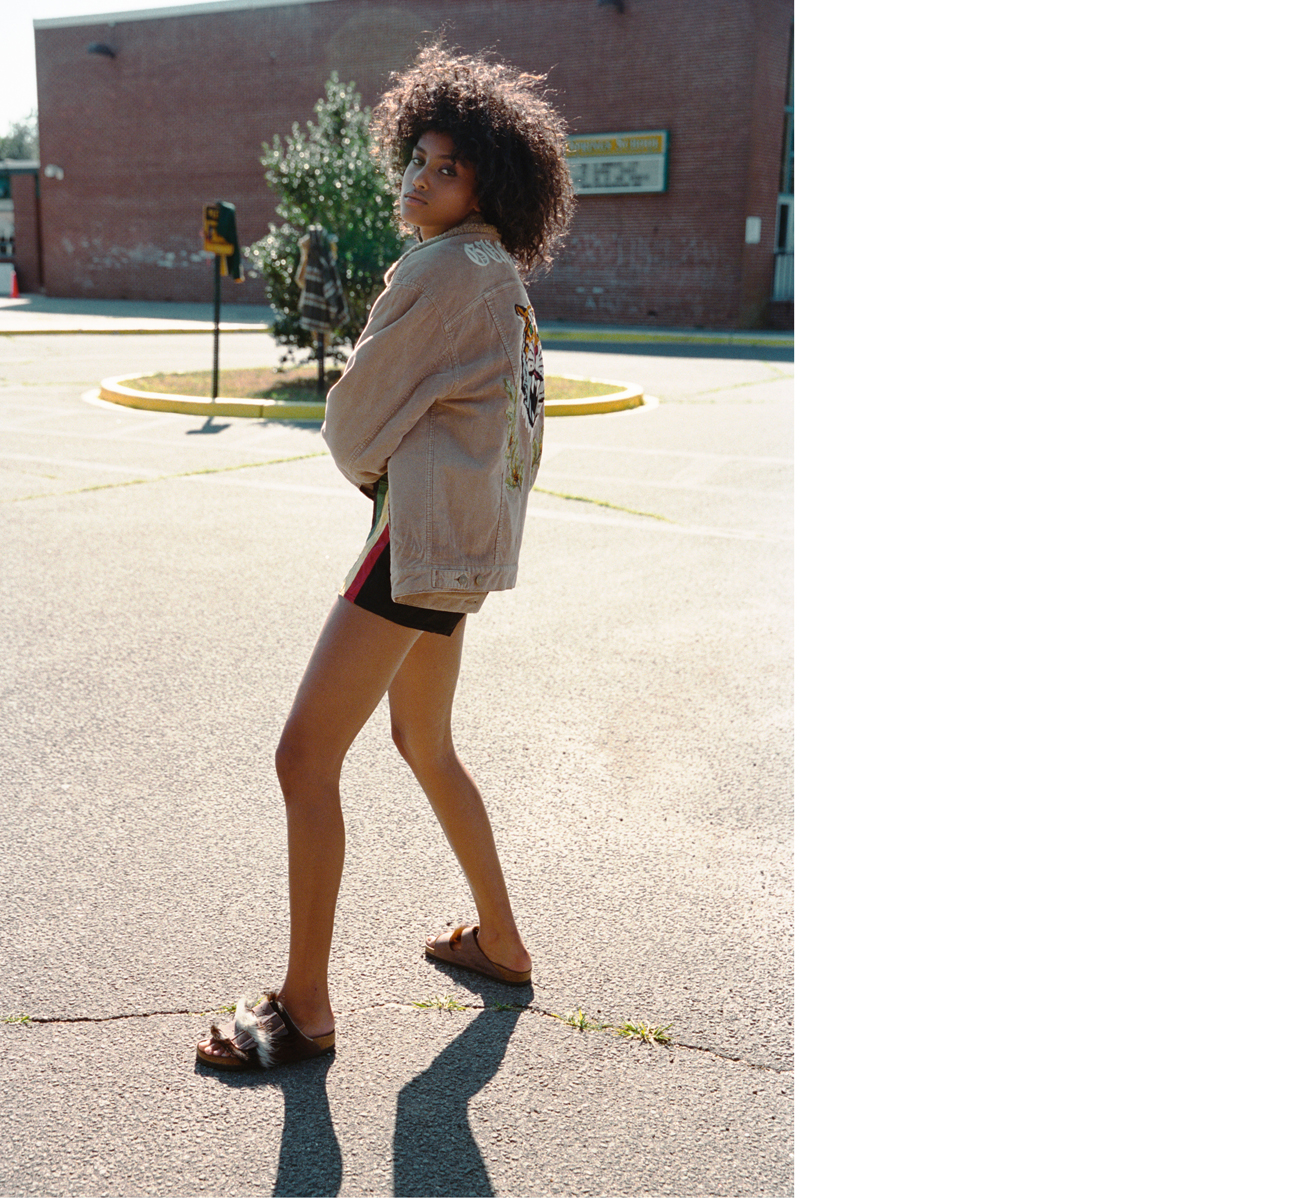 Jacket by Gucci. Vintage shorts from Southpaw Vintage, New York. Sandals by Birkenstock.